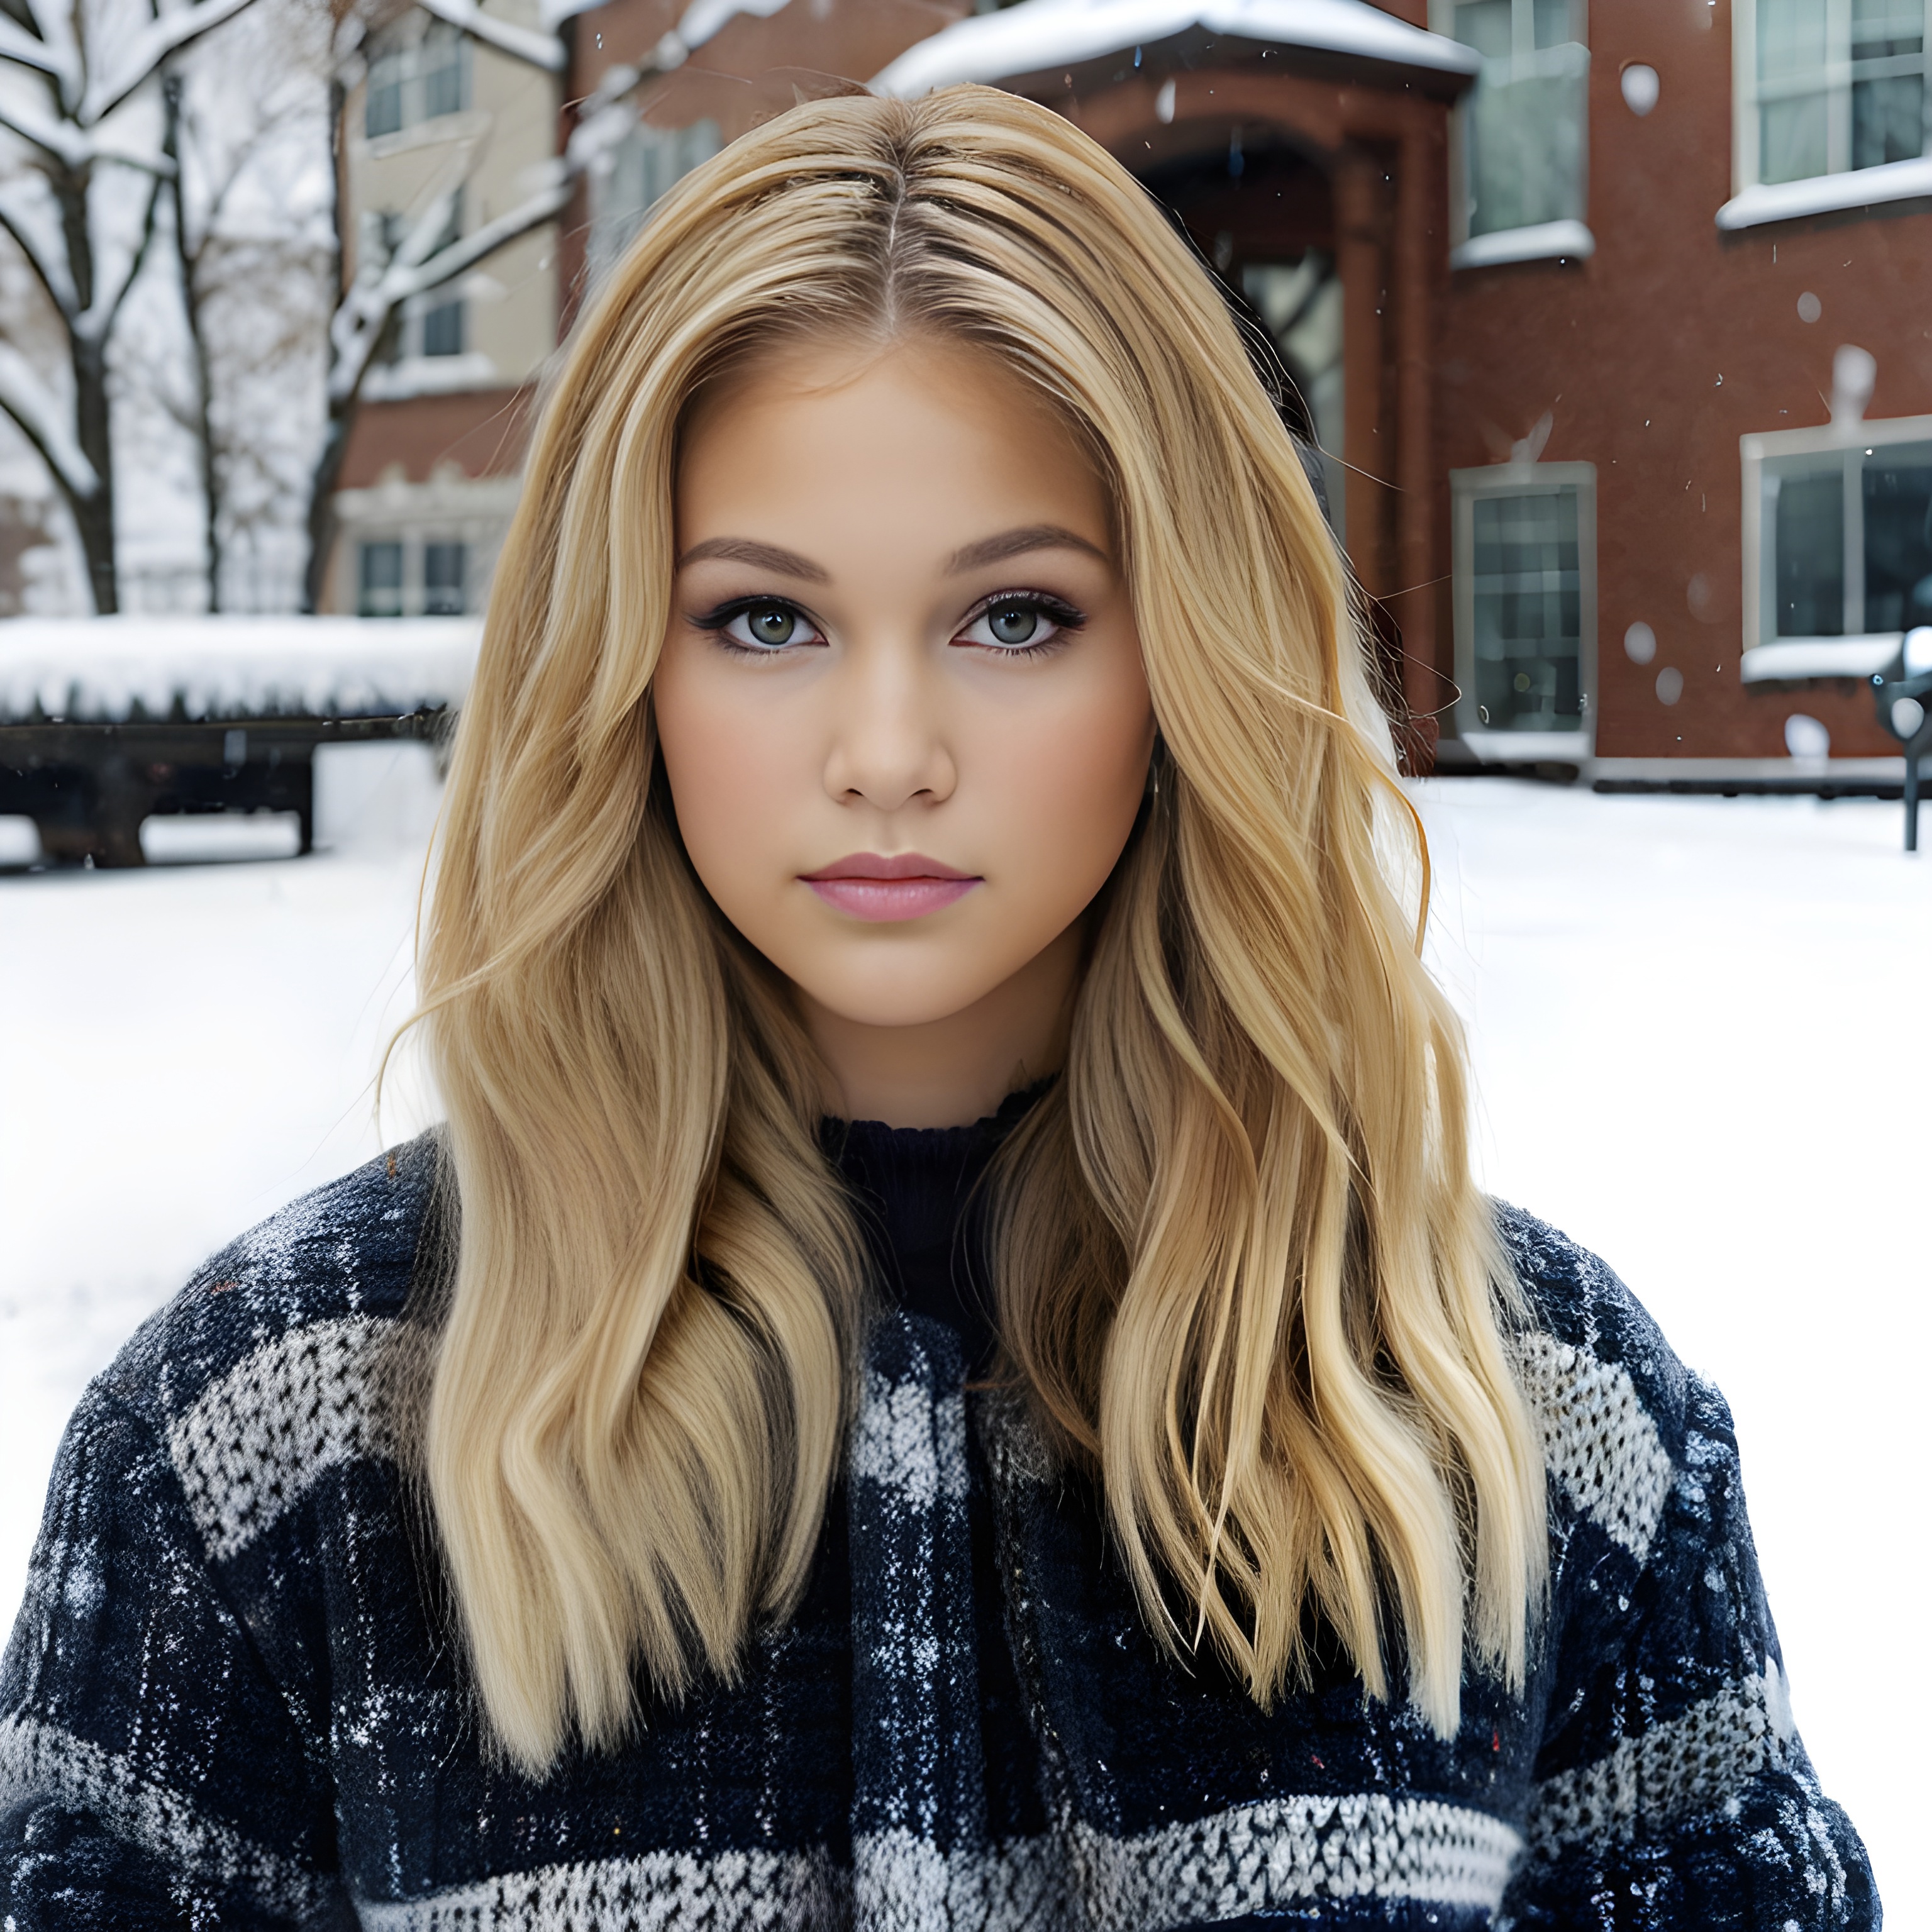 Olivia Holt image by 83catsonthemoon